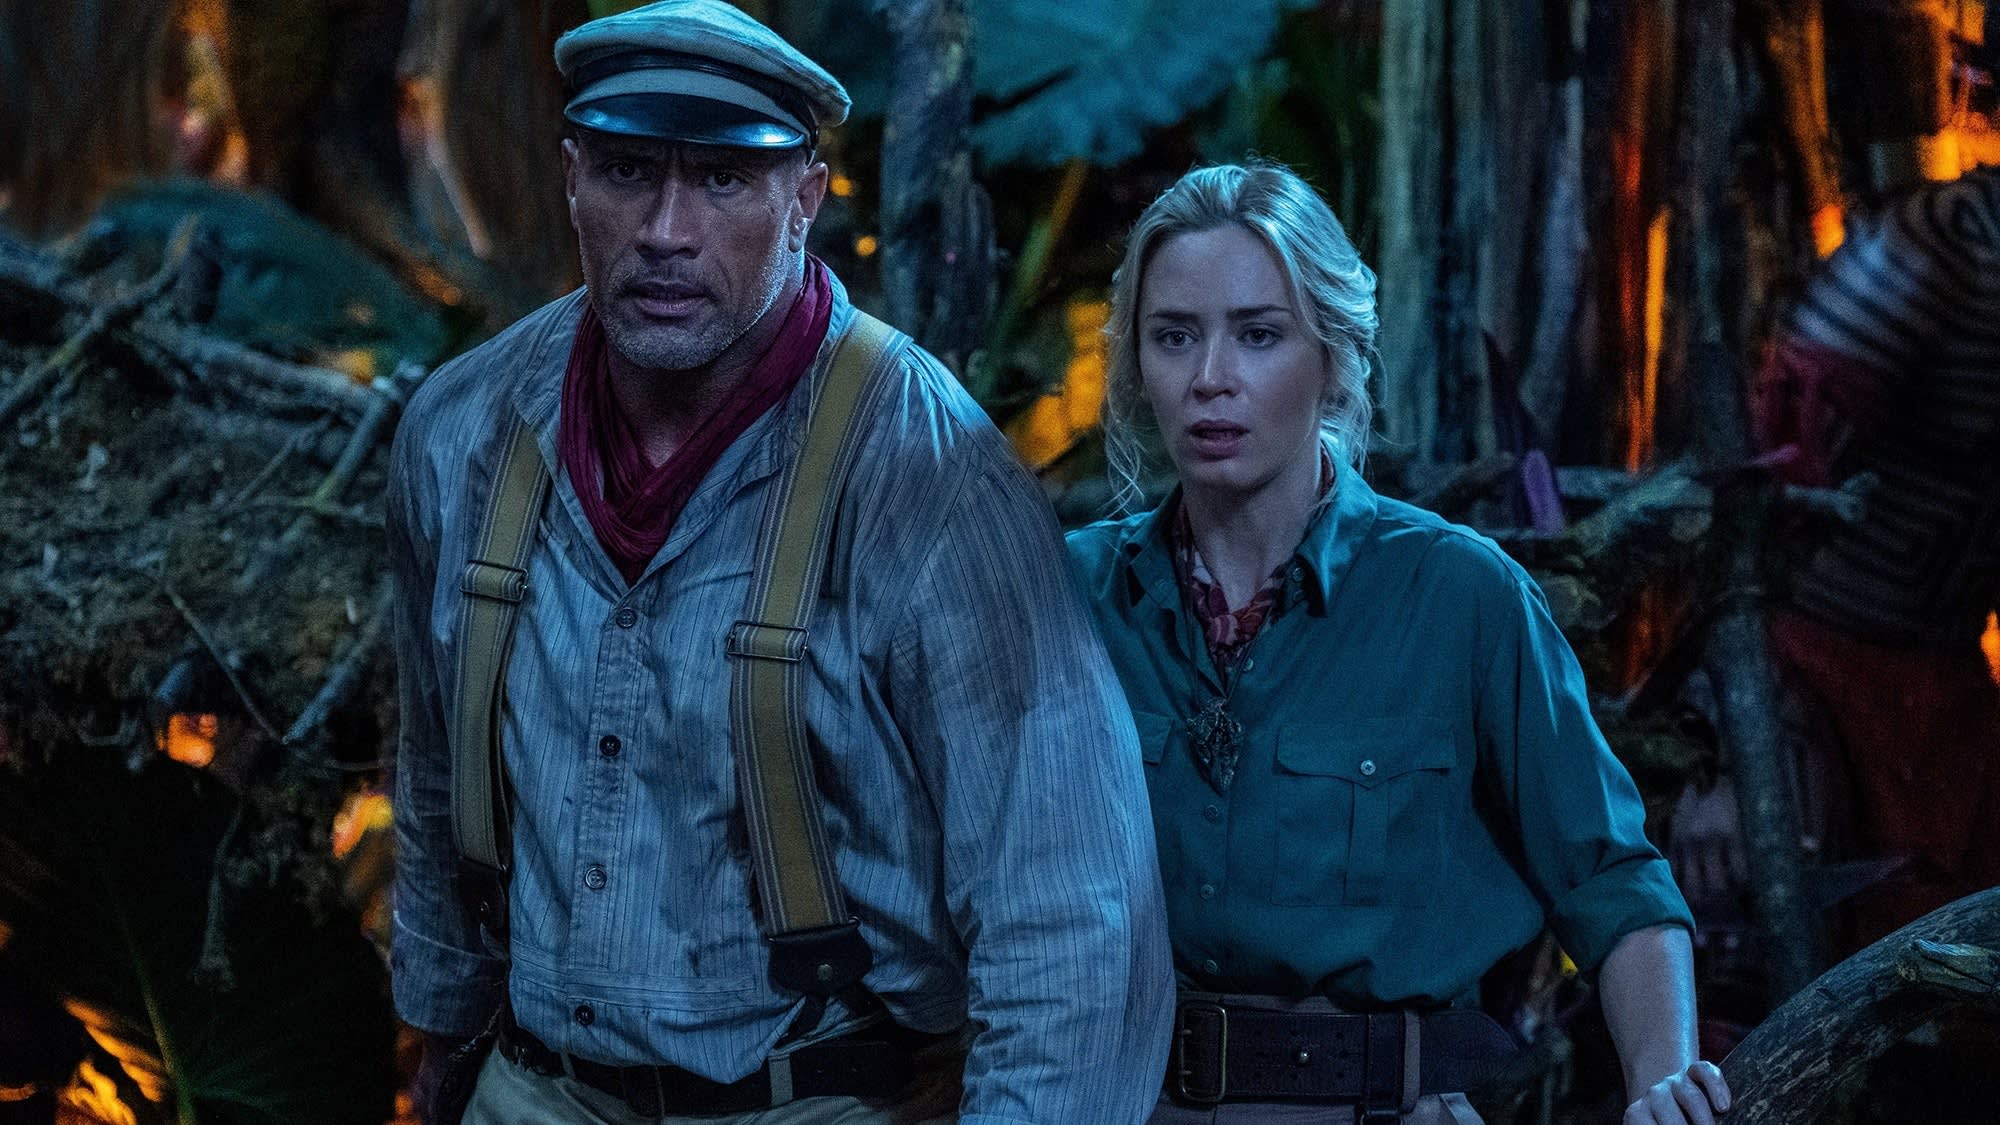 ‘Jungle Cruise’ has $34.2 million debut, provides $30 million from Disney+